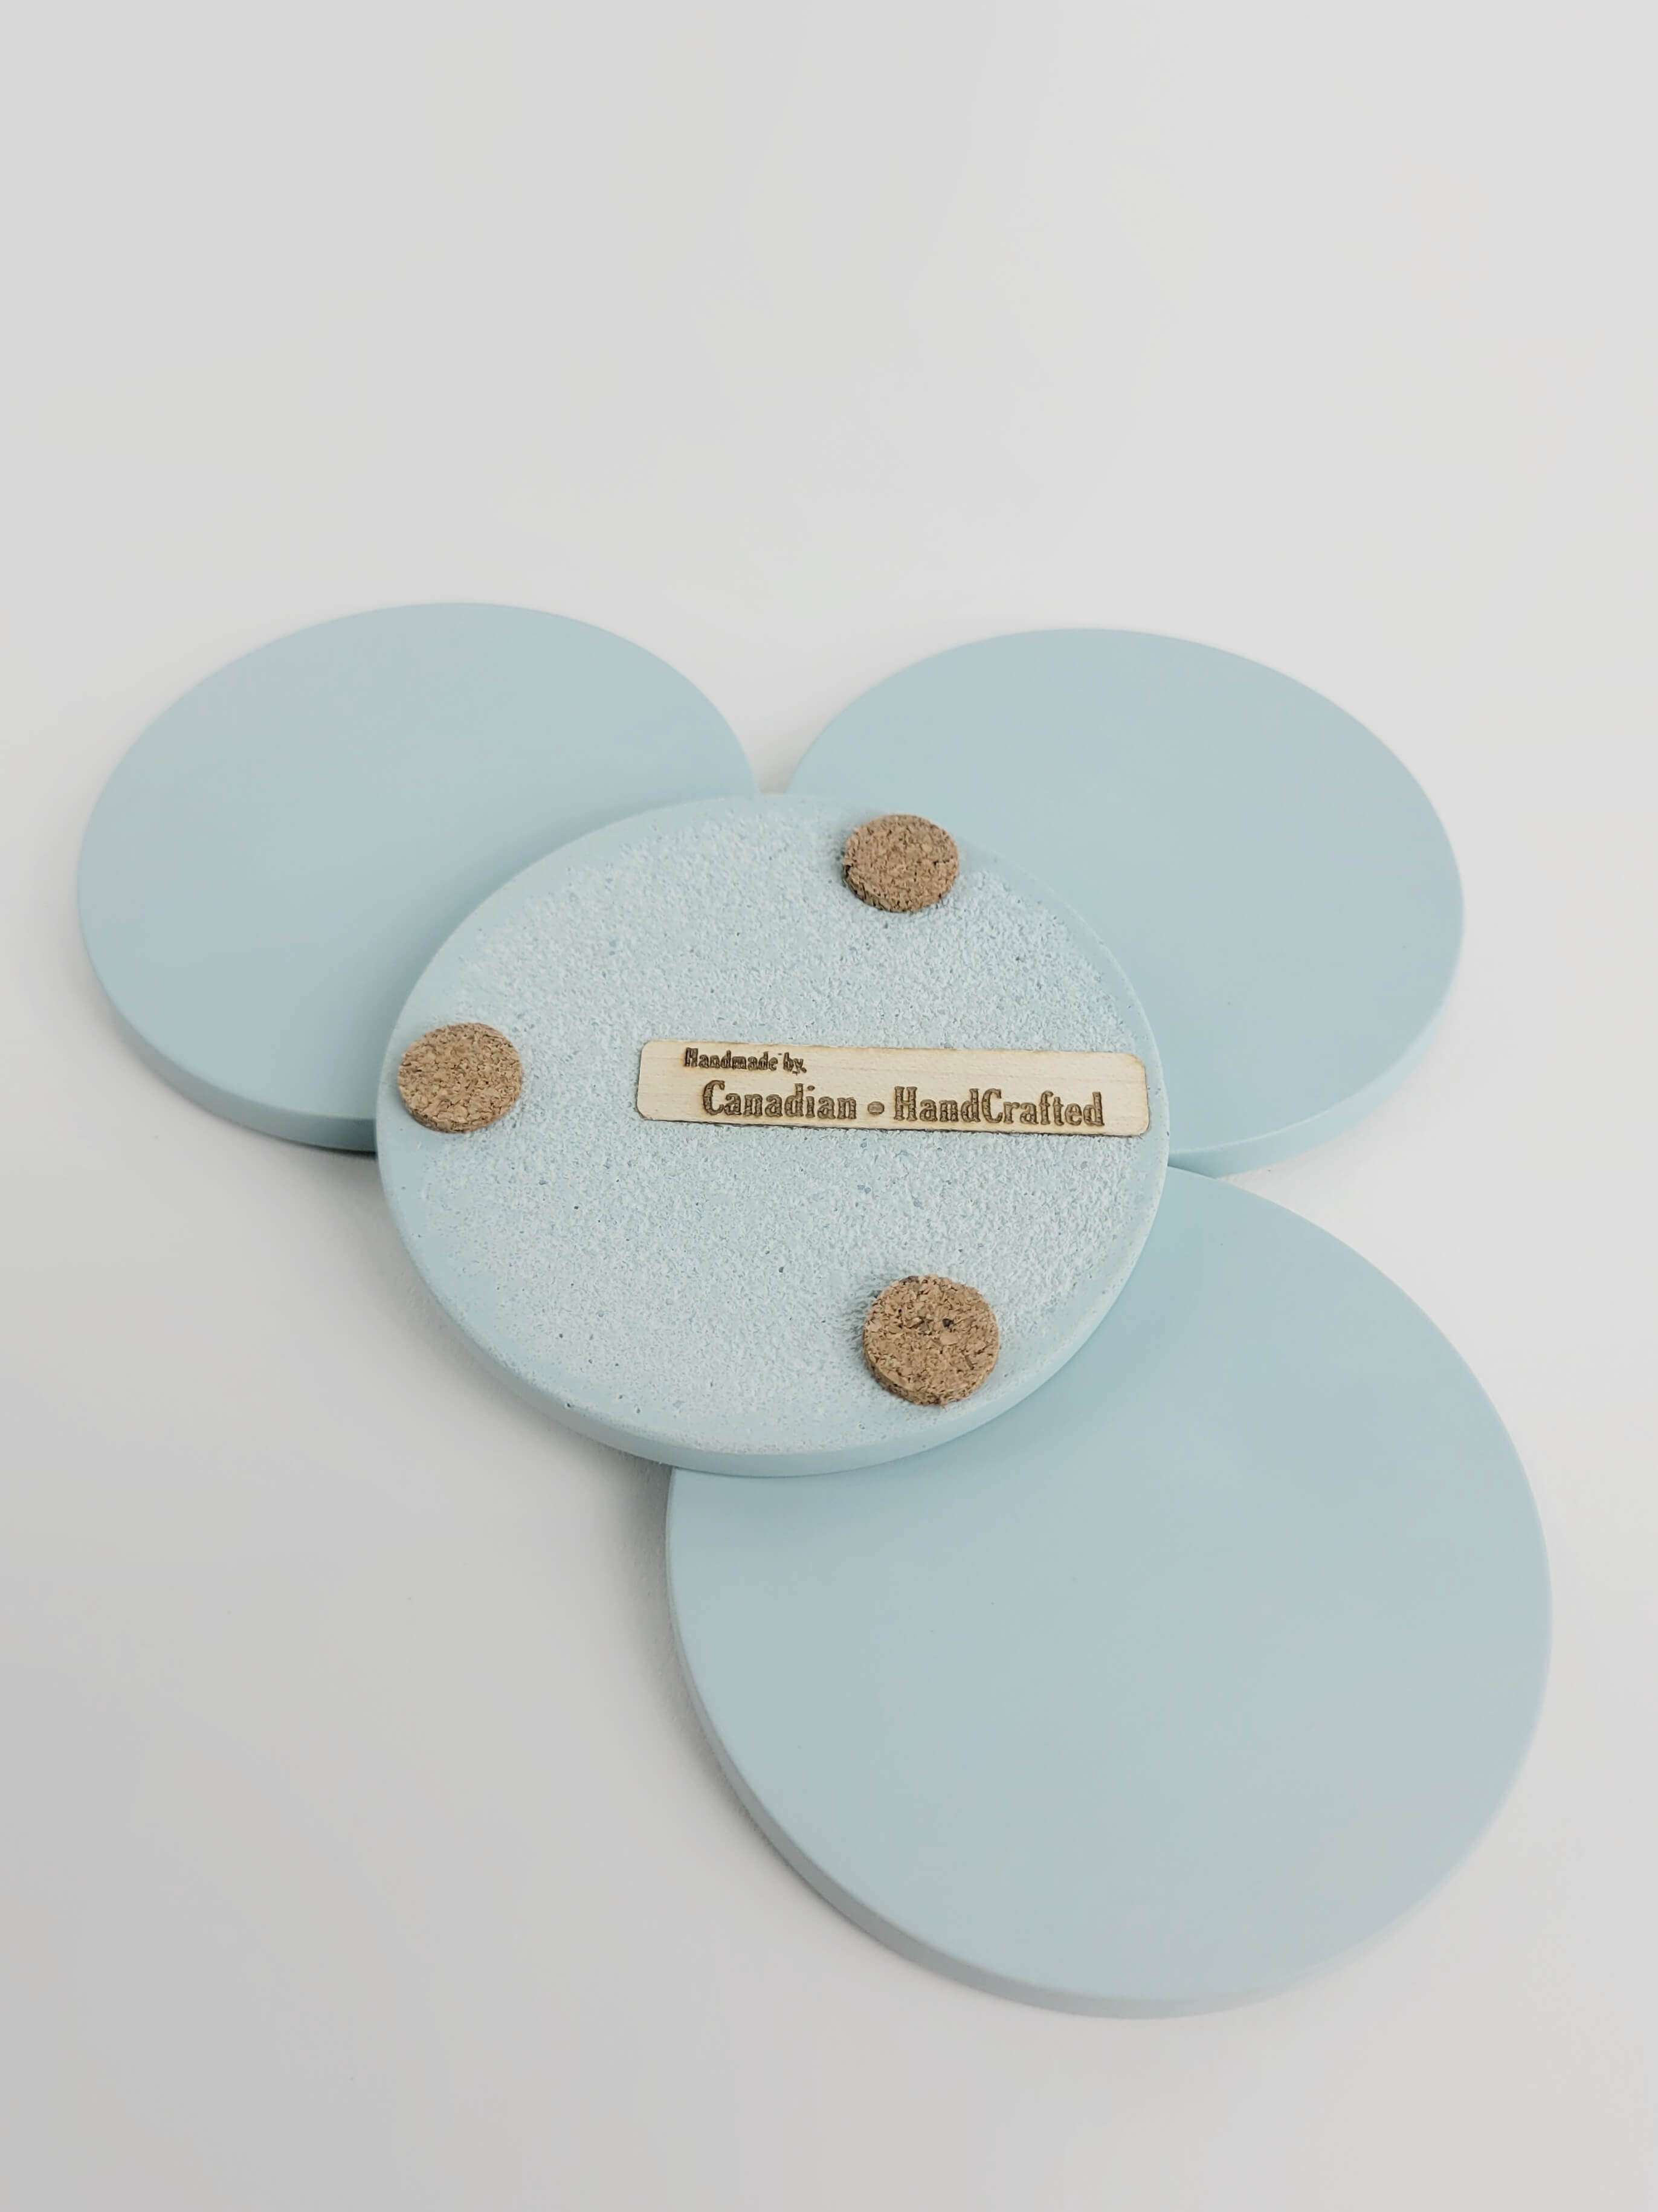 Set of 4 pastel turquoise concrete coasters, one flipped to reveal the underside featuring 3 cork bumpers and an engraved wooden veneer with the text 'Handmade by Canadian HandCrafted'.